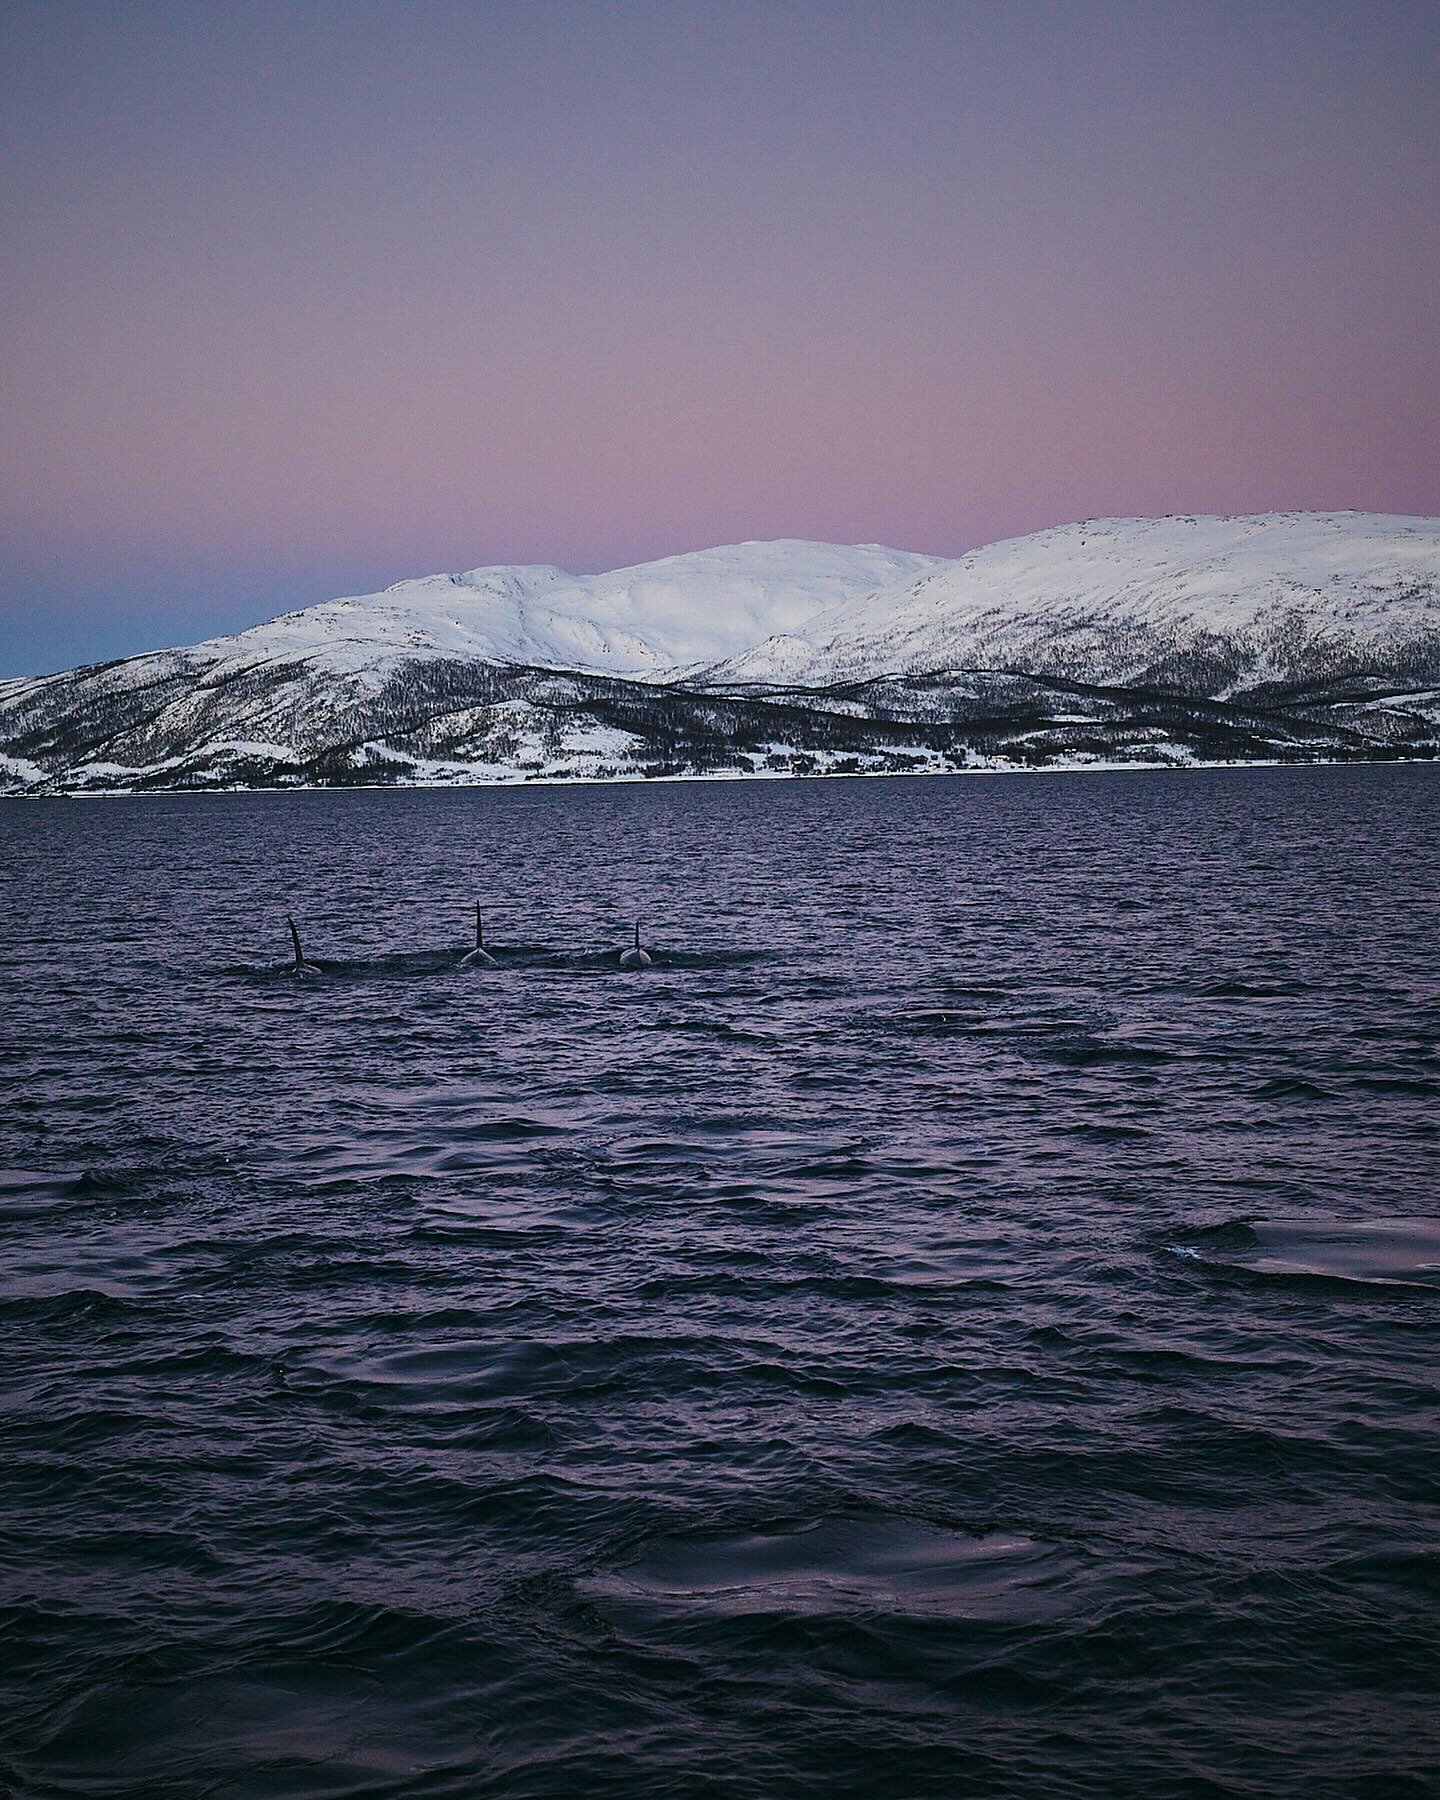 Tr&oslash;mso, Norway. Around 350KM above the Arctic Circle, I captured these fascinating Orca pods swimming freely in the northern Norwegian waters. by @marinosallowicz
#Norway #Orca #OrcaPods #Marine #WildNorway #OrcaEncounter #ChasingWhales